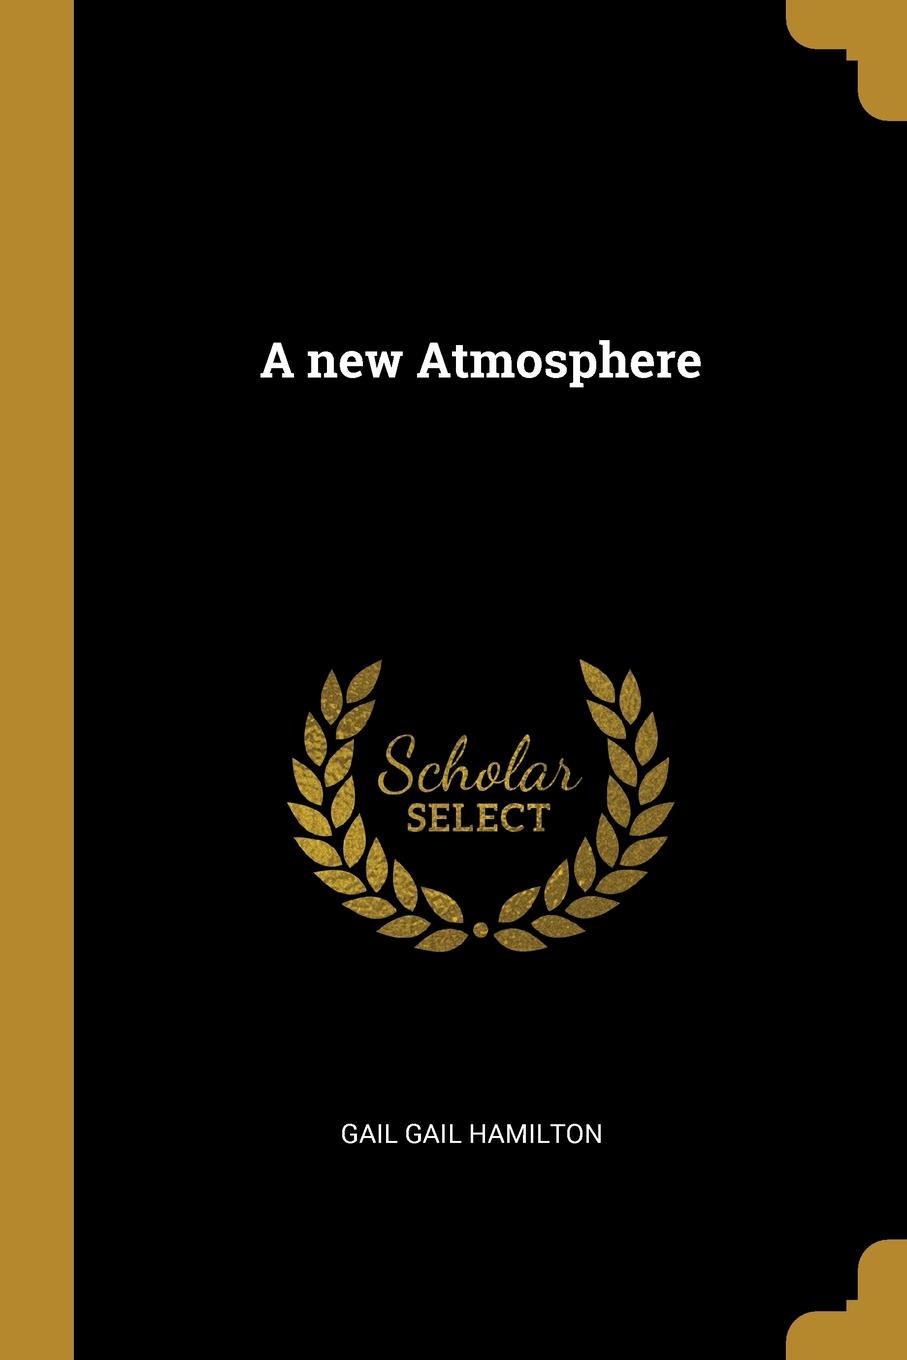 A new Atmosphere